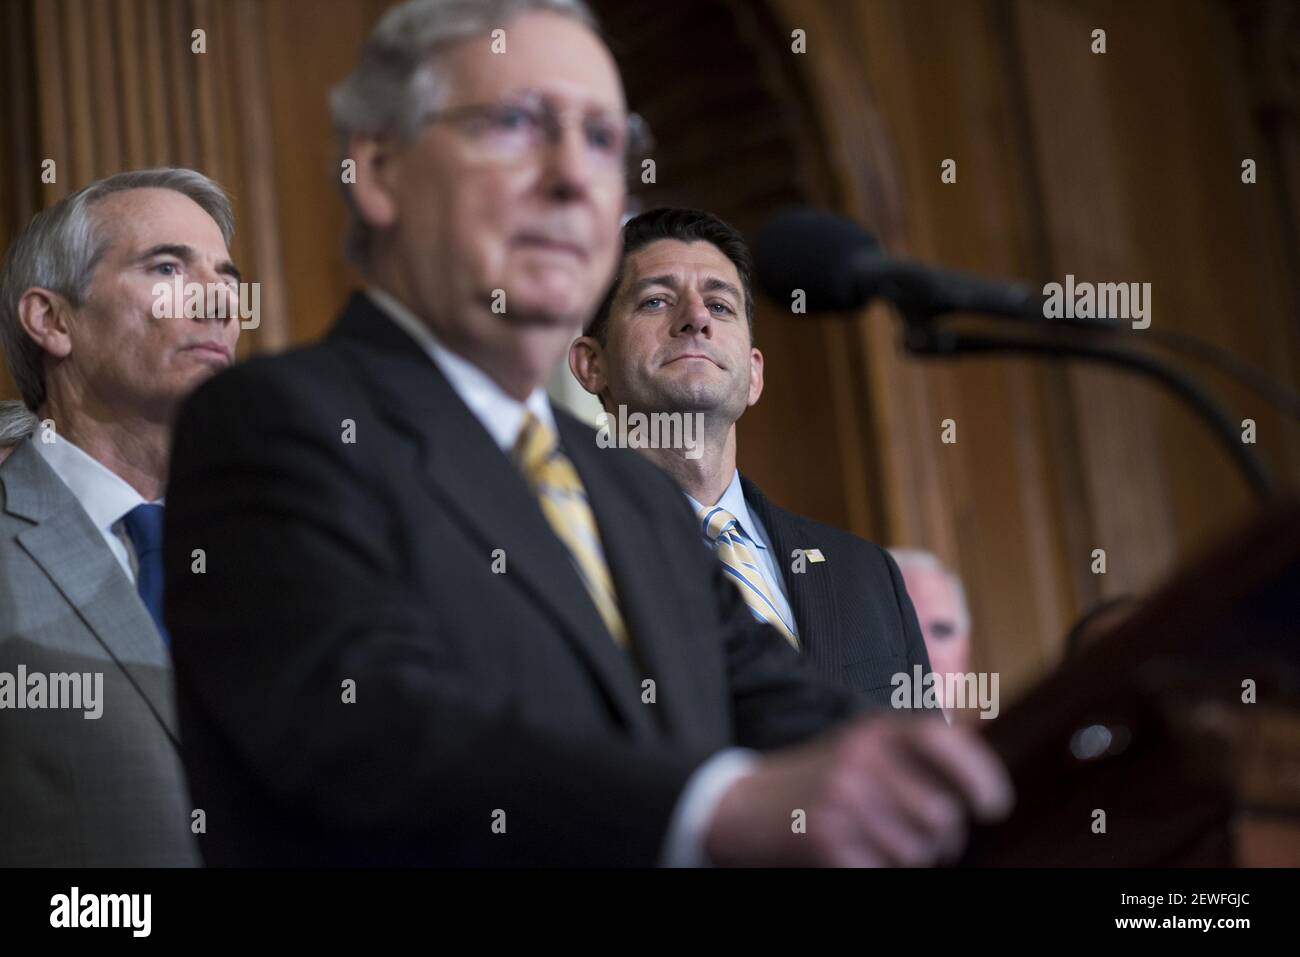 UNITED STATES - JULY 14: From left, Sen. Rob Portman, R-Ohio, Senate Majority Leader Mitch McConnell, R-Ky., and Speaker Paul D. Ryan, R-Wis., attend an enrollment ceremony in the Capitol's Rayburn Room for the 'Comprehensive Addiction and Recovery Act,' July 14, 2016. (Photo By Tom Williams/CQ Roll Call) *** Please Use Credit from Credit Field *** Stock Photo